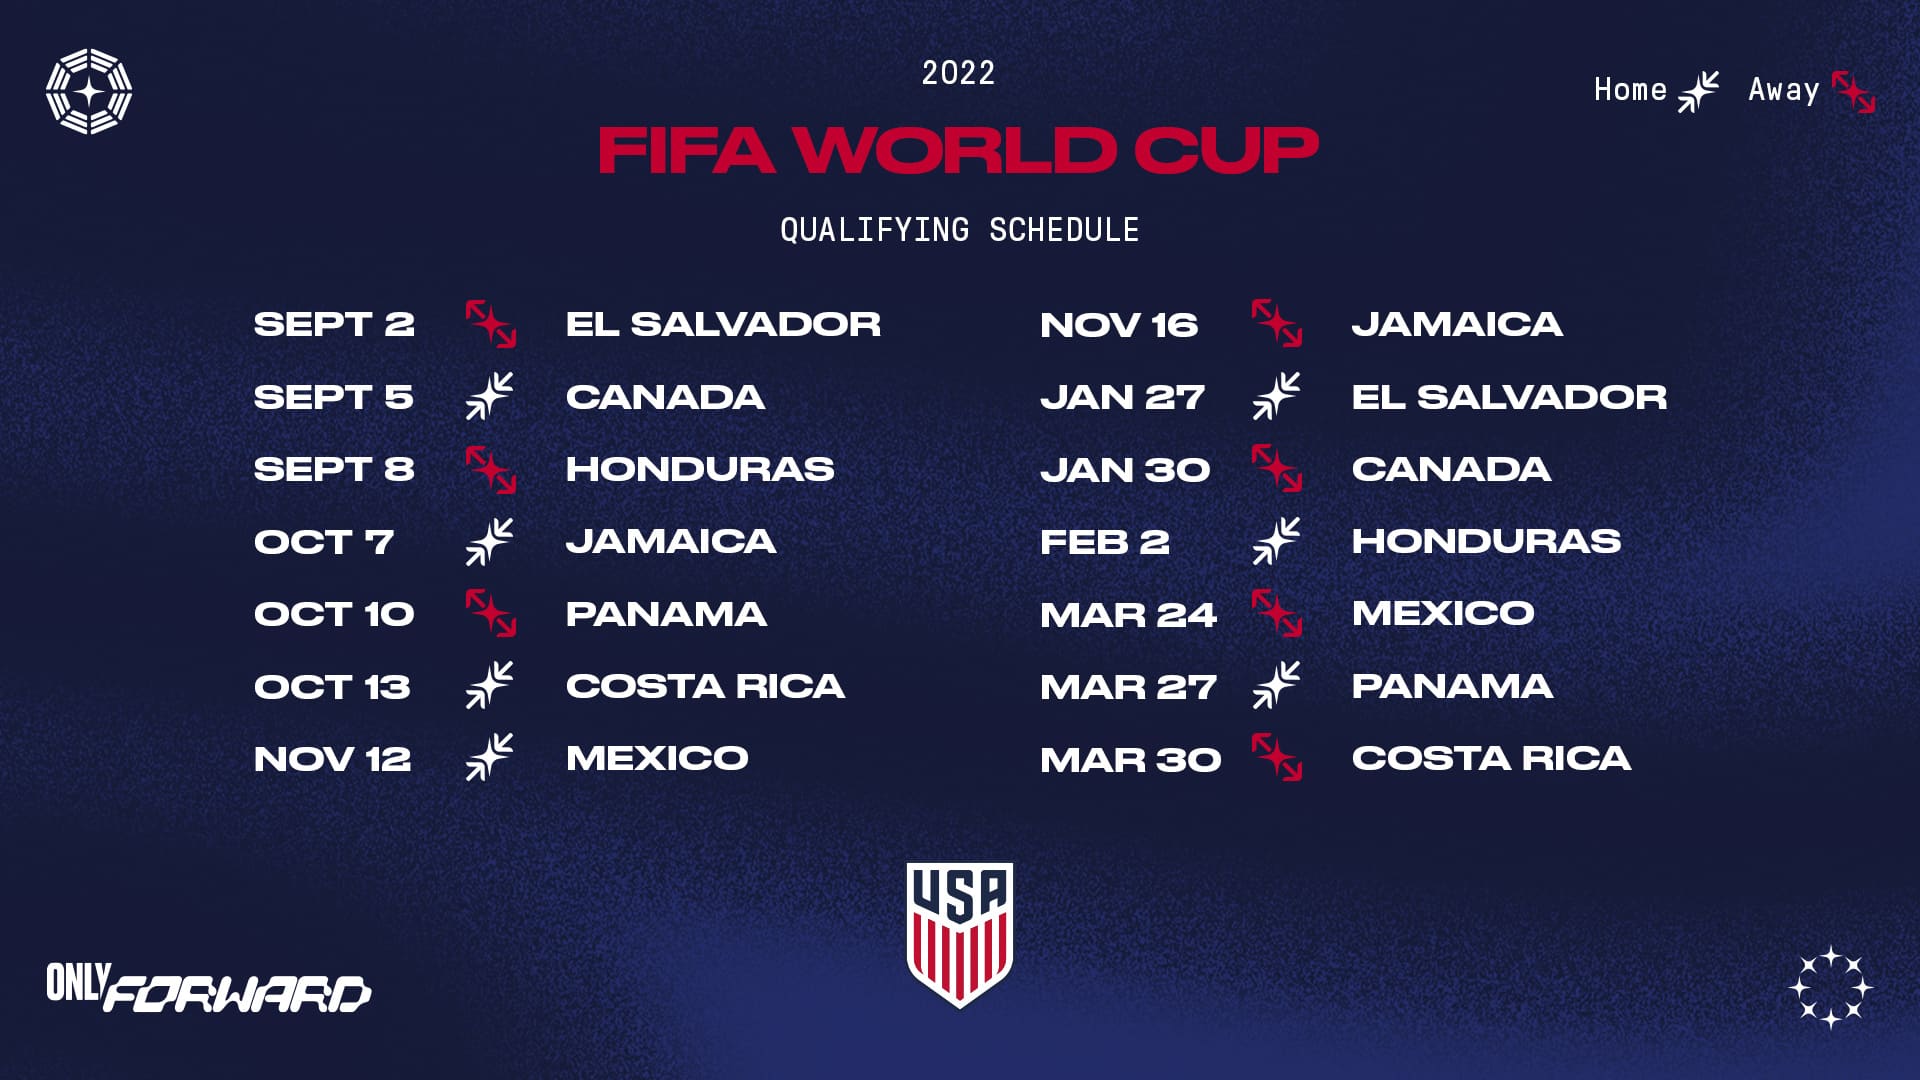 Breaking down the USMNT's 2022 FIFA World Cup qualifying journey